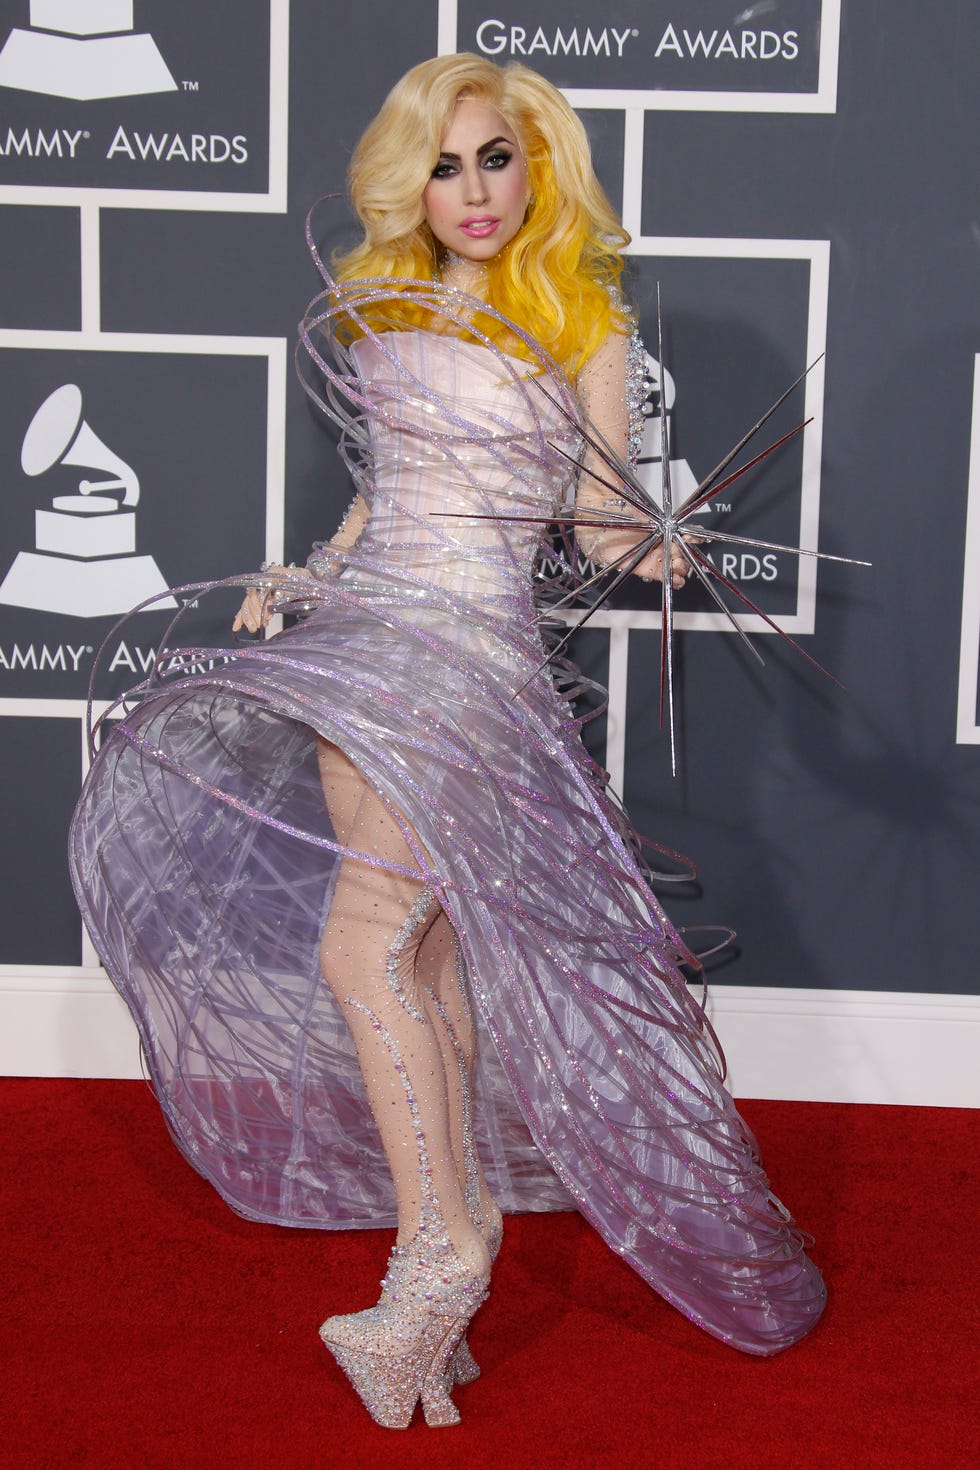 52nd Annual GRAMMY Awards - Arrivals